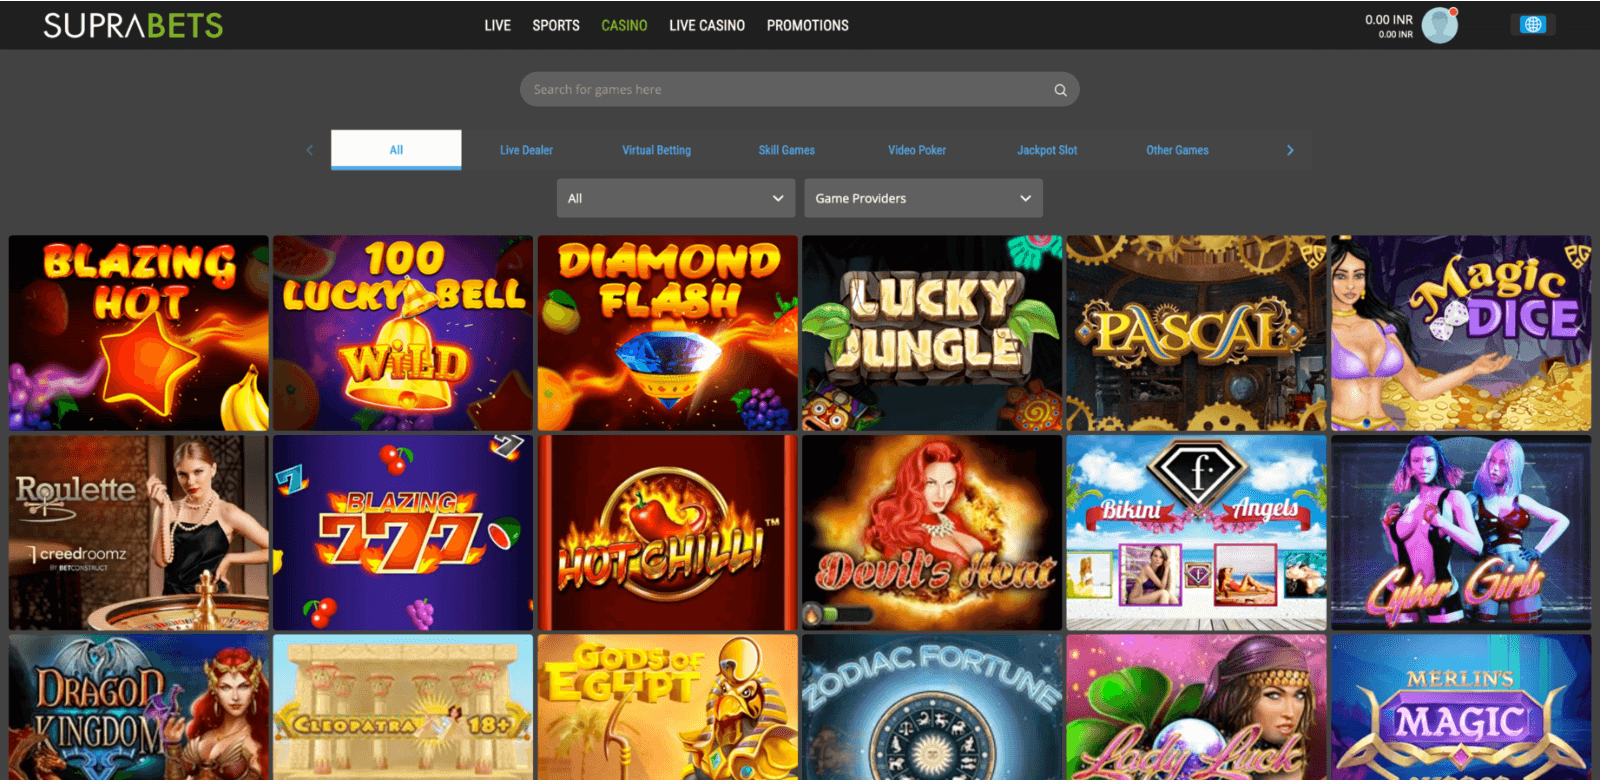 Casino section of Suprabets website in India